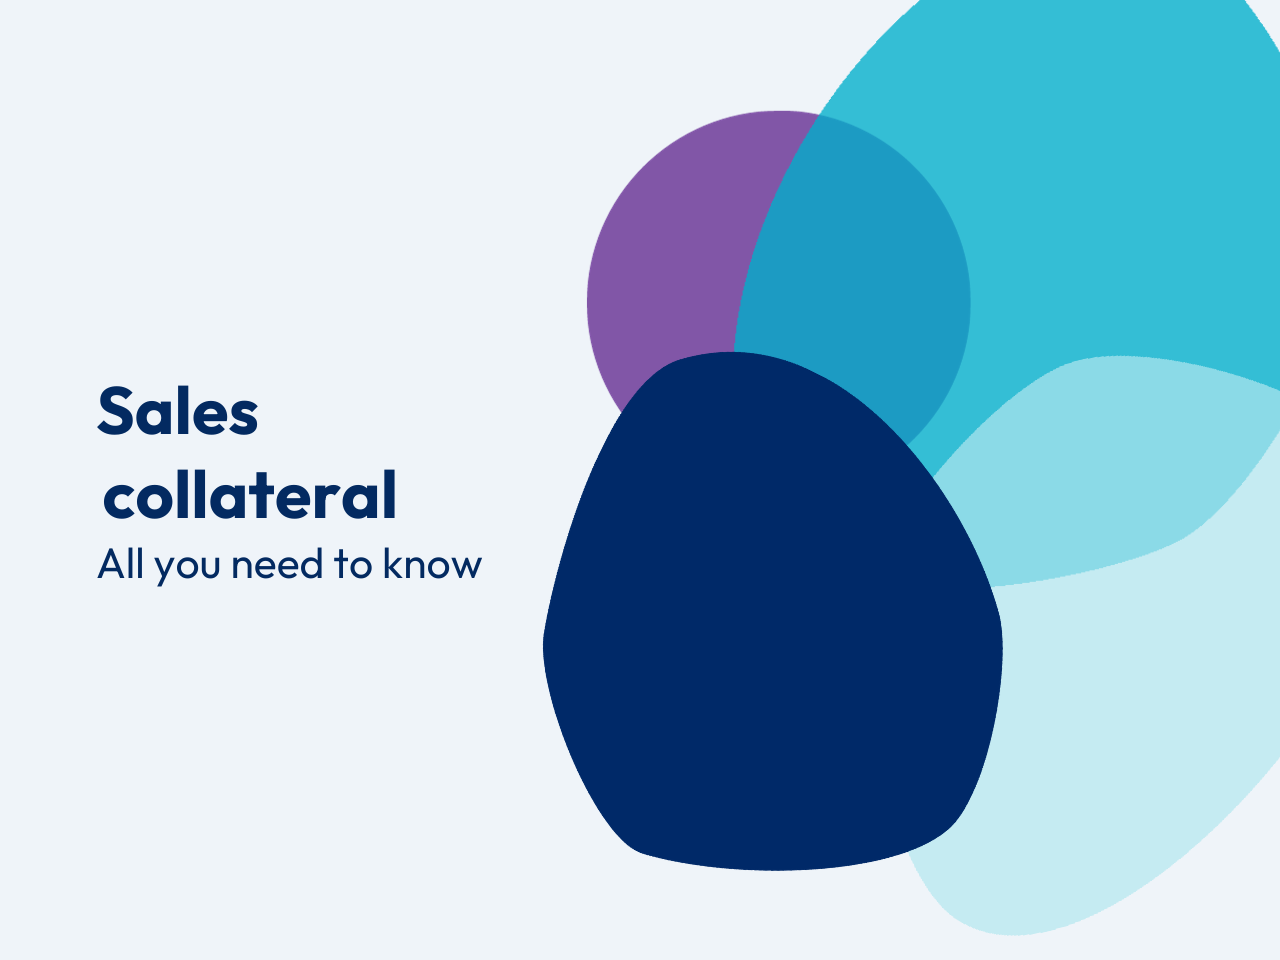 Feature image for Turtl pillar post called Sales collateral: All you need to know